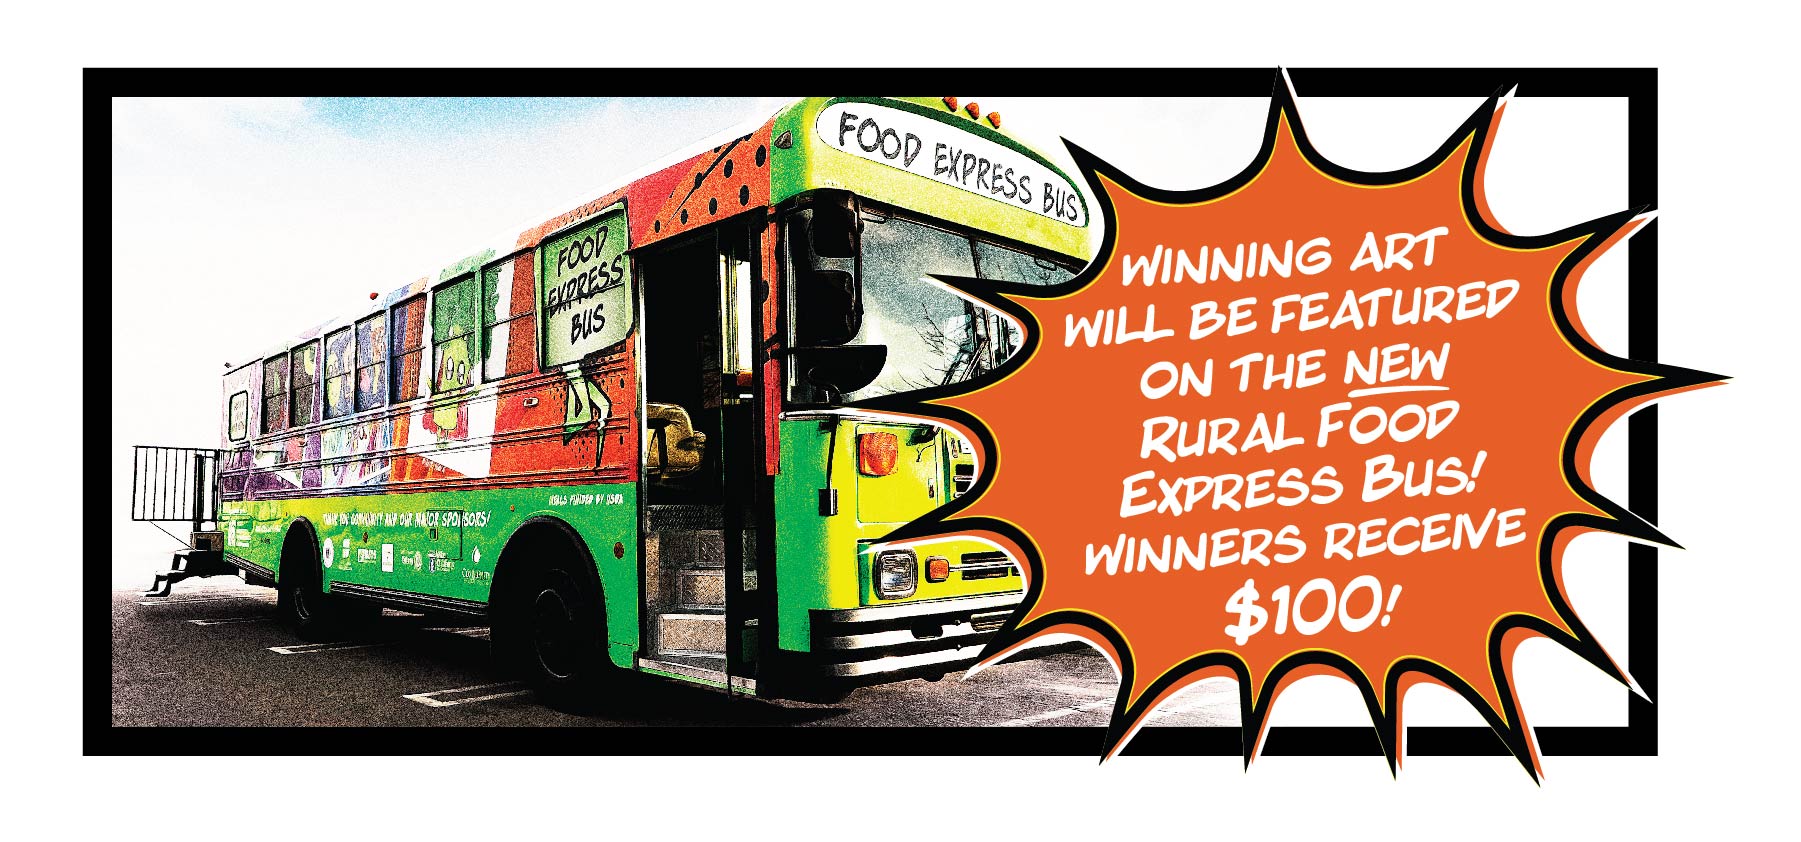 Rural Food Express Bus Art Contest: Winning art will be featured on the new rural food express bus!